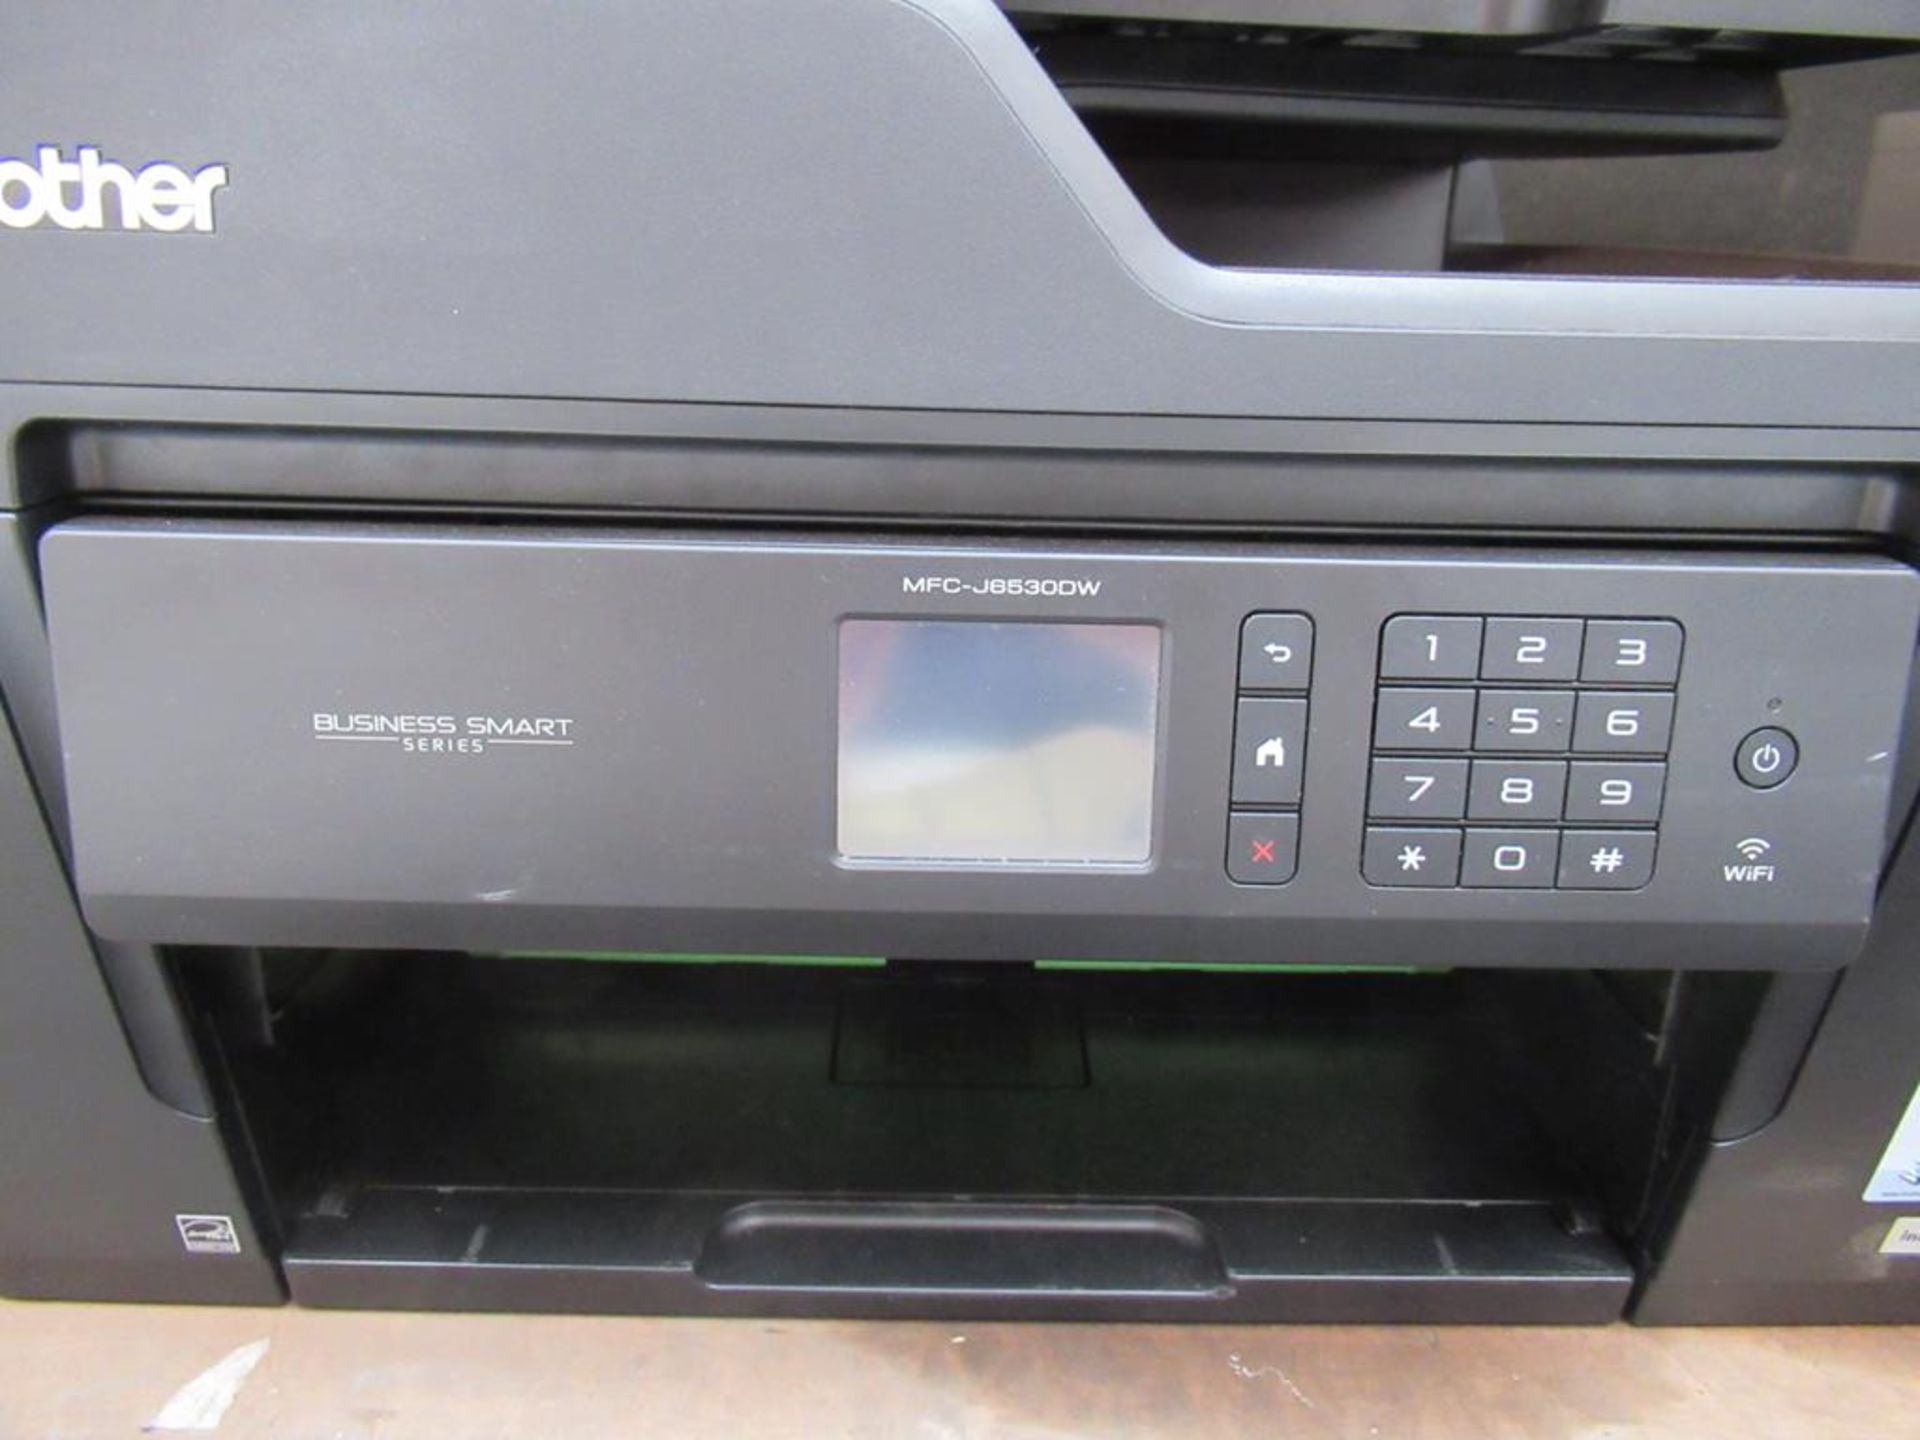 Brother MFC-J6530DW Multi-Function Printer - Image 2 of 2